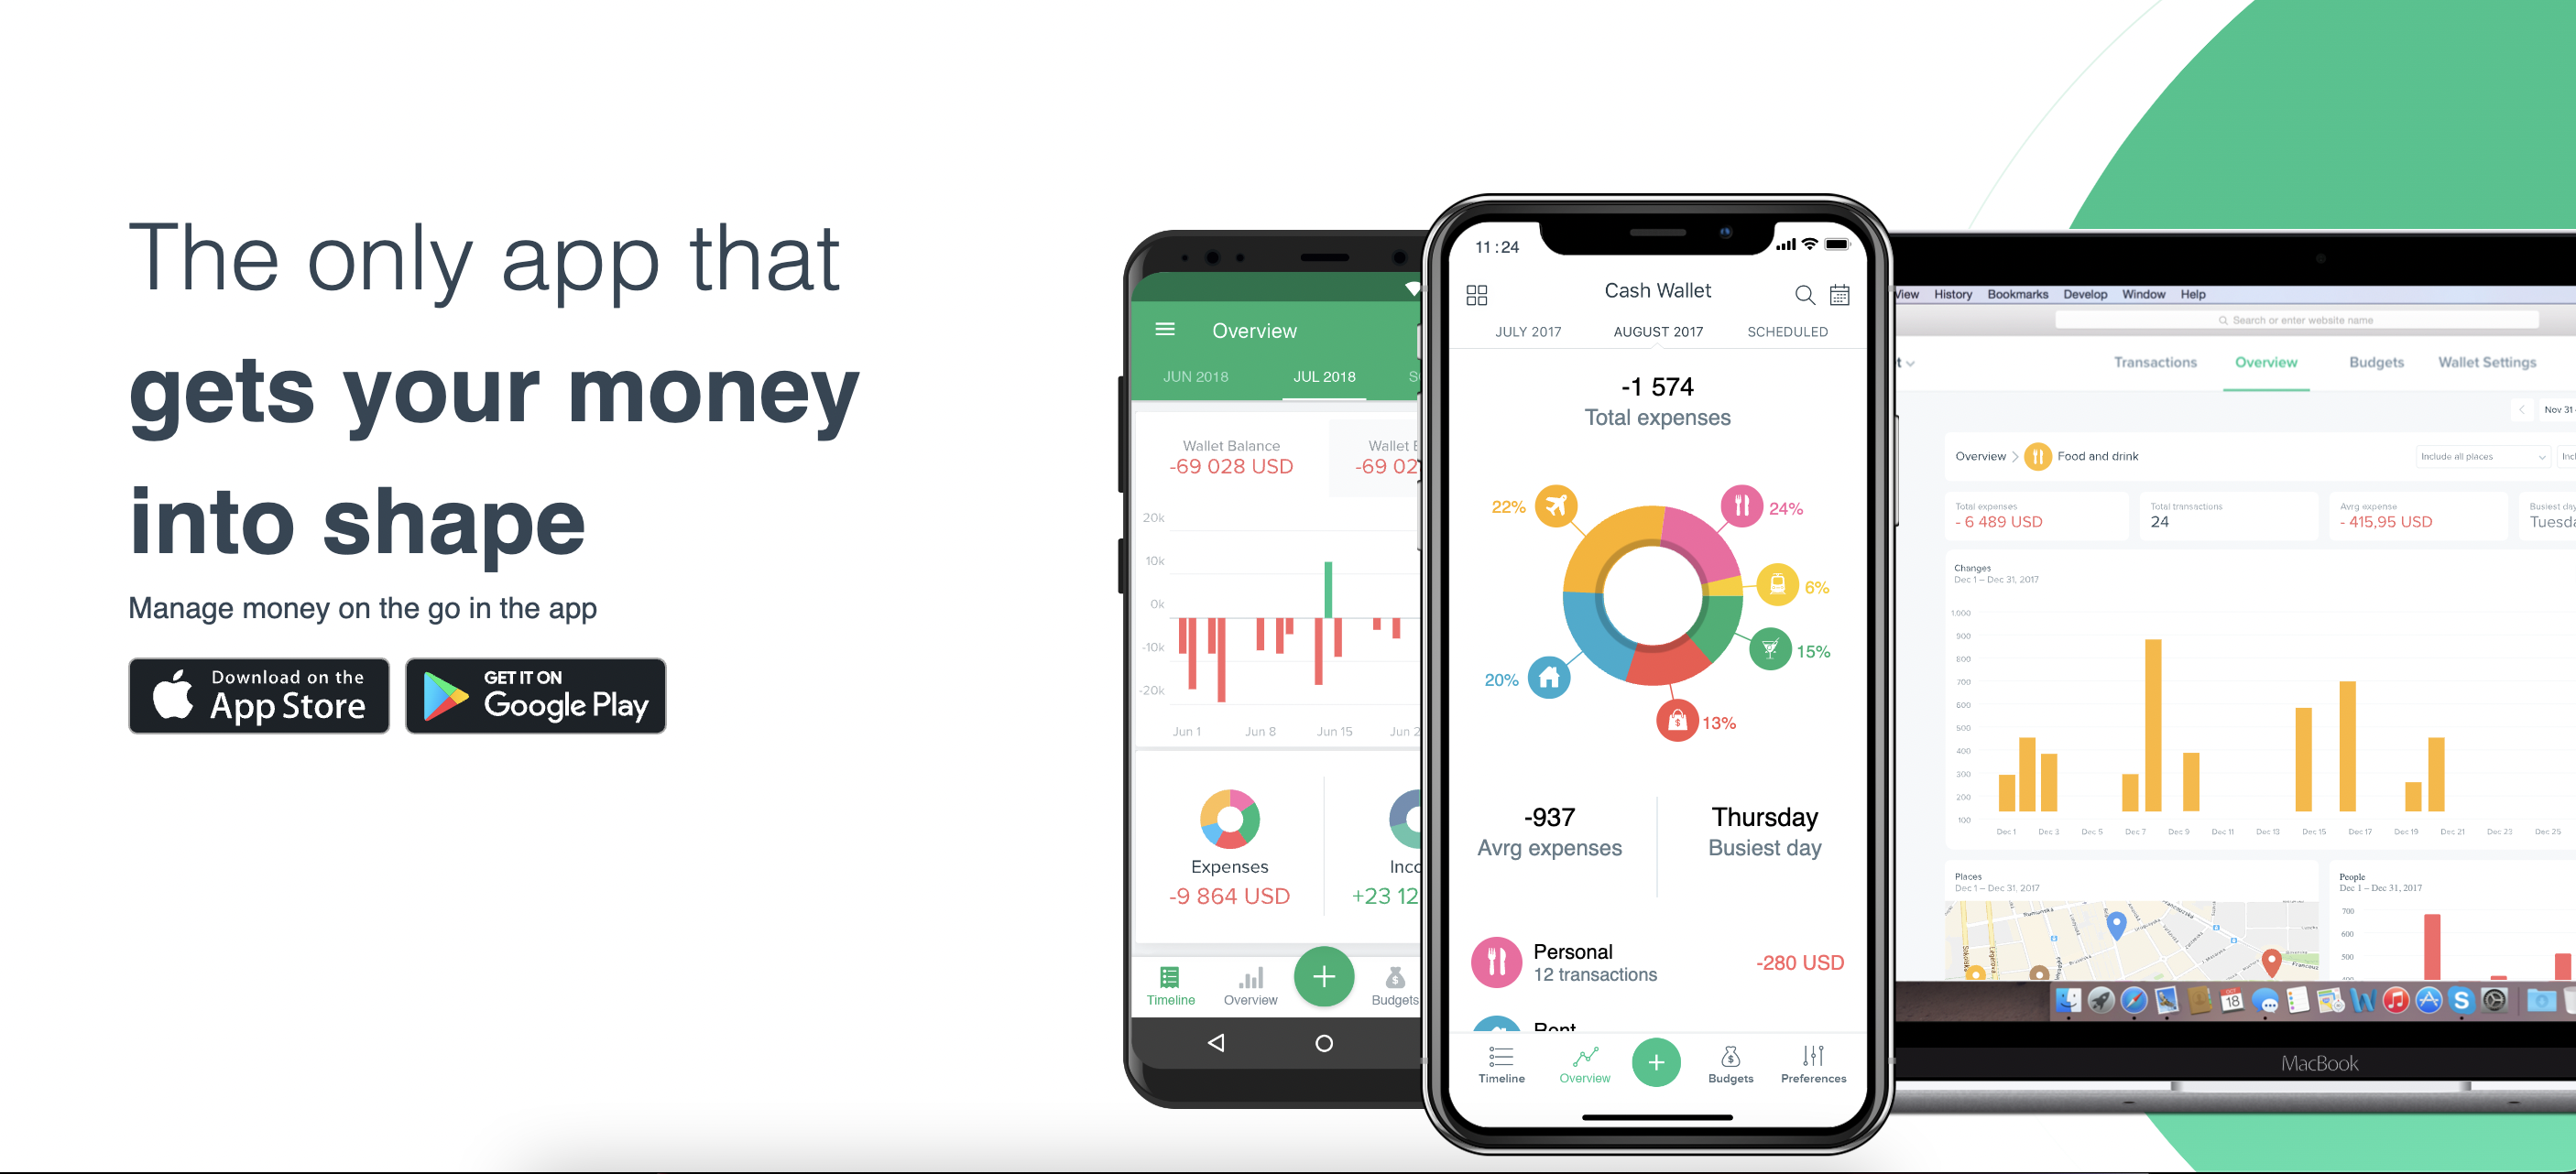 The only app that gets your money into shape
Manage money on the go in the app